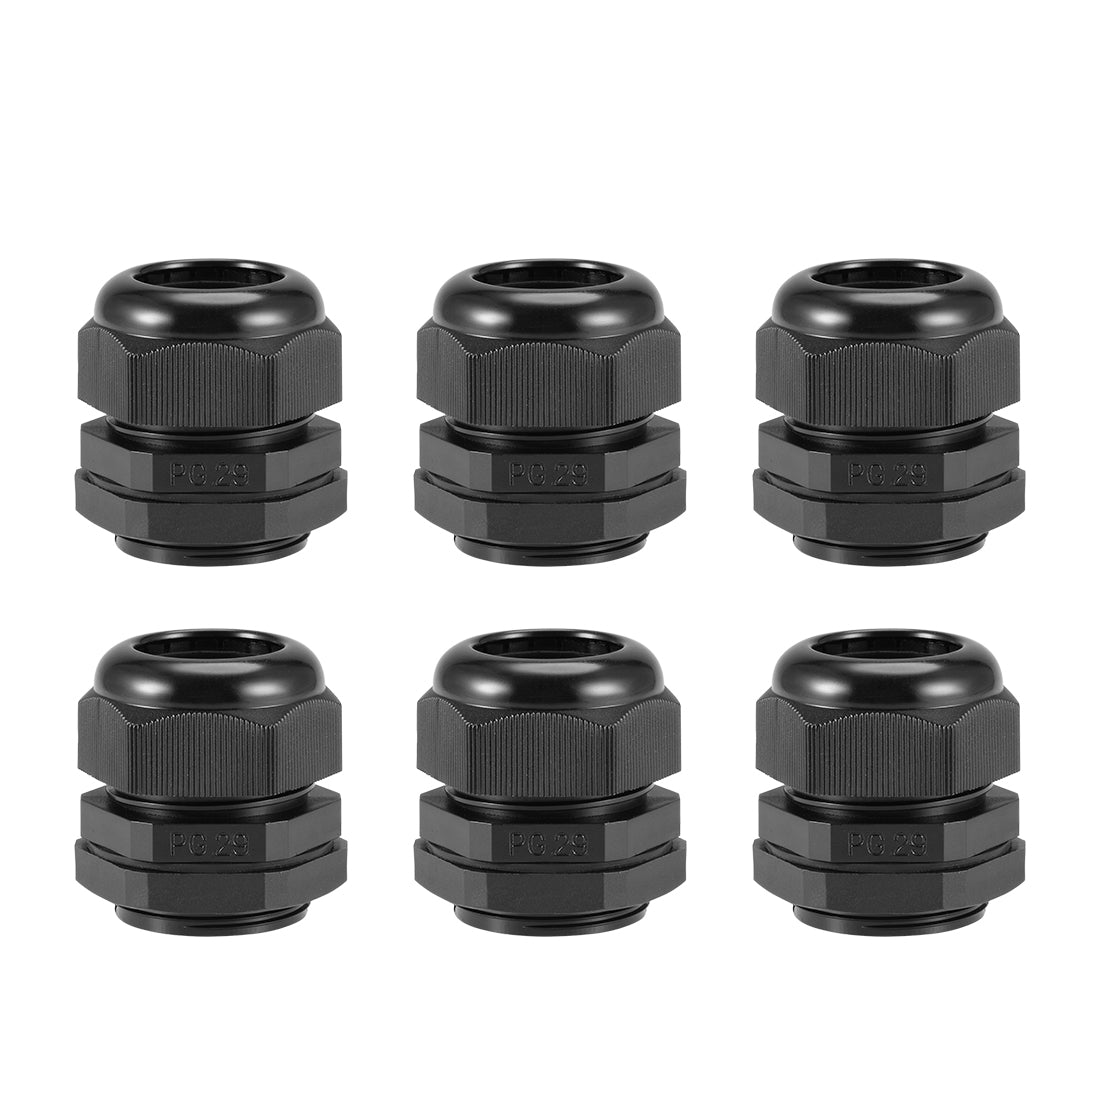 uxcell Uxcell PG29 Cable Gland 13mm-20mm Wire Hole Waterproof Nylon Joint Adjustable Locknut with Washer Black 6pcs